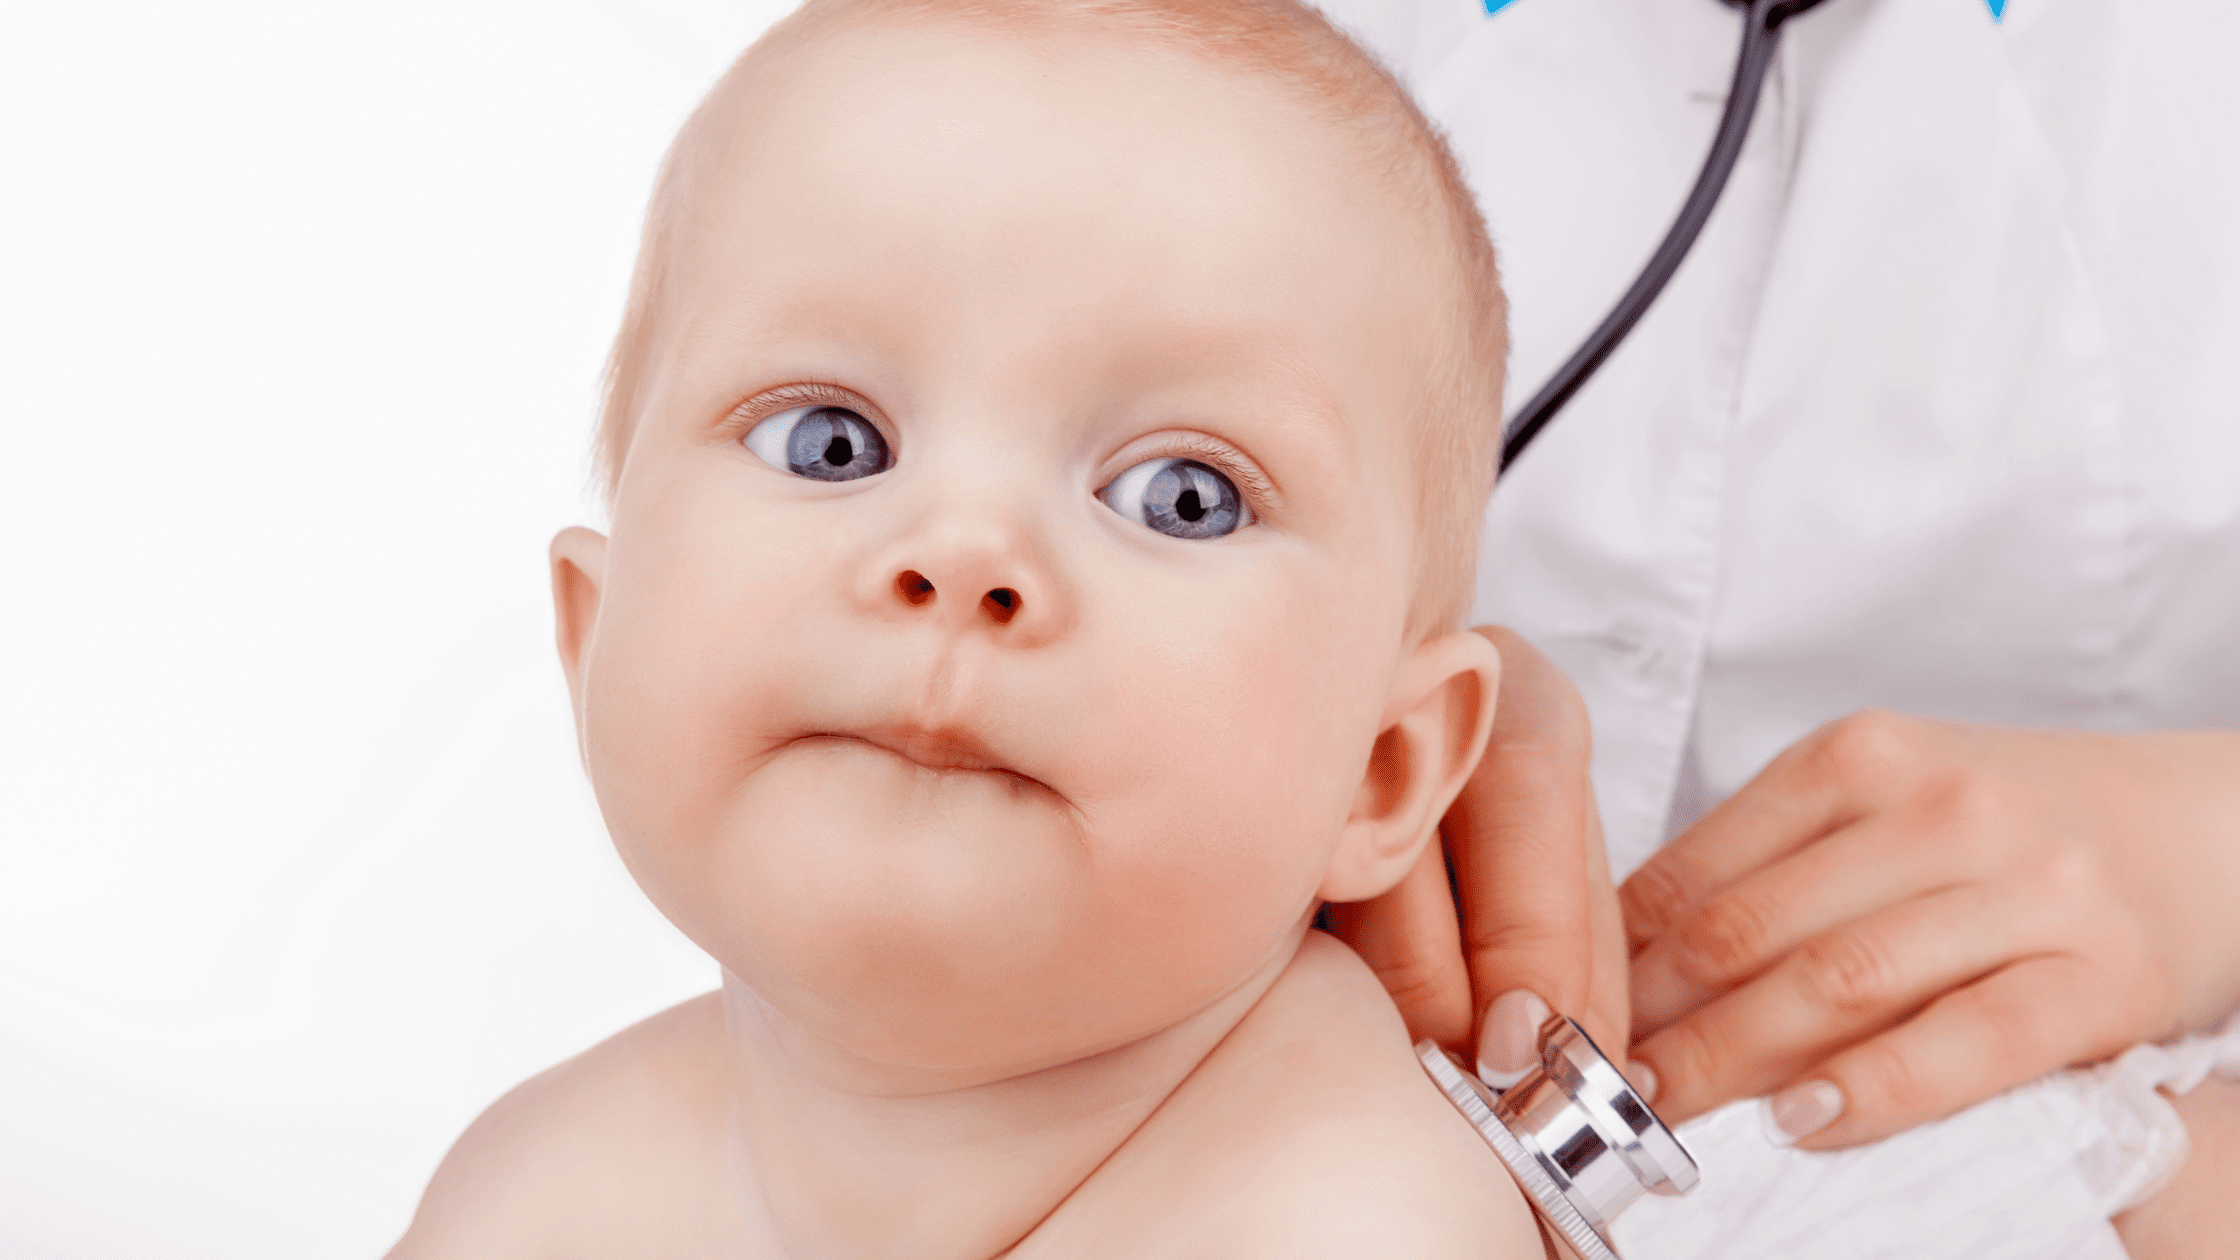 A Med/Peds resident listening to the heart of a baby using a stethoscope.